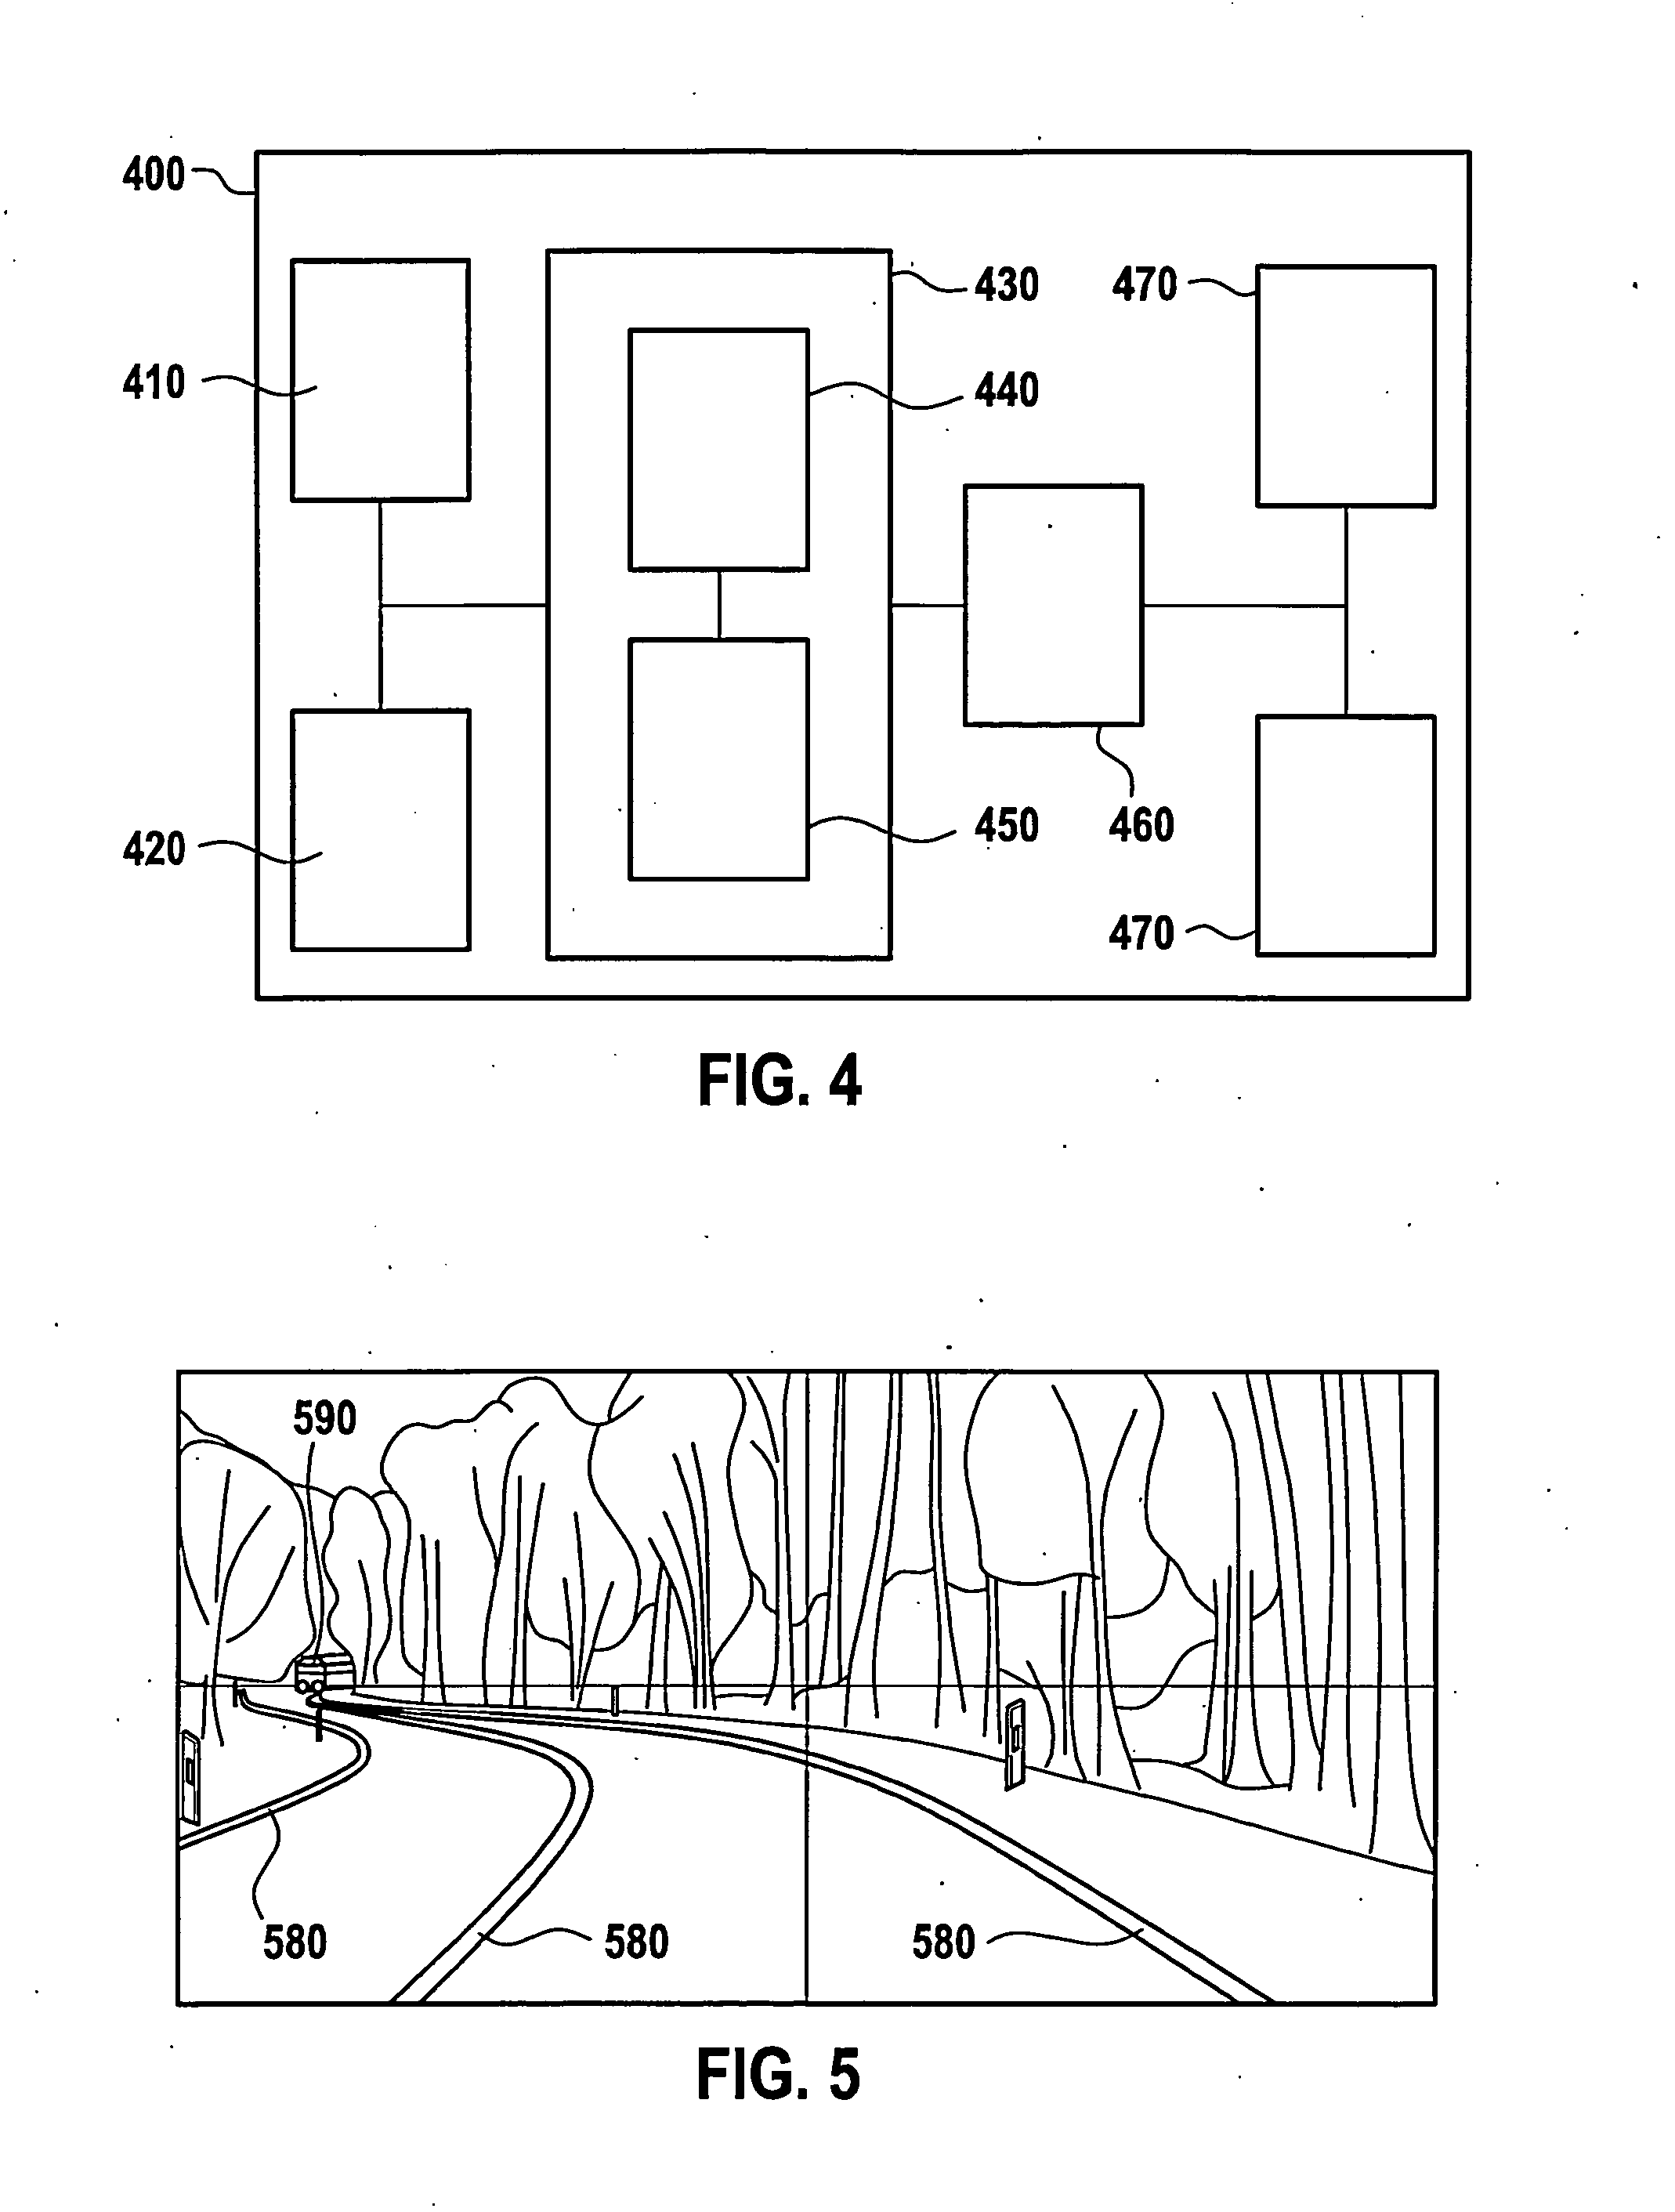 Method and device for controlling a light emission from a headlight of a vehicle